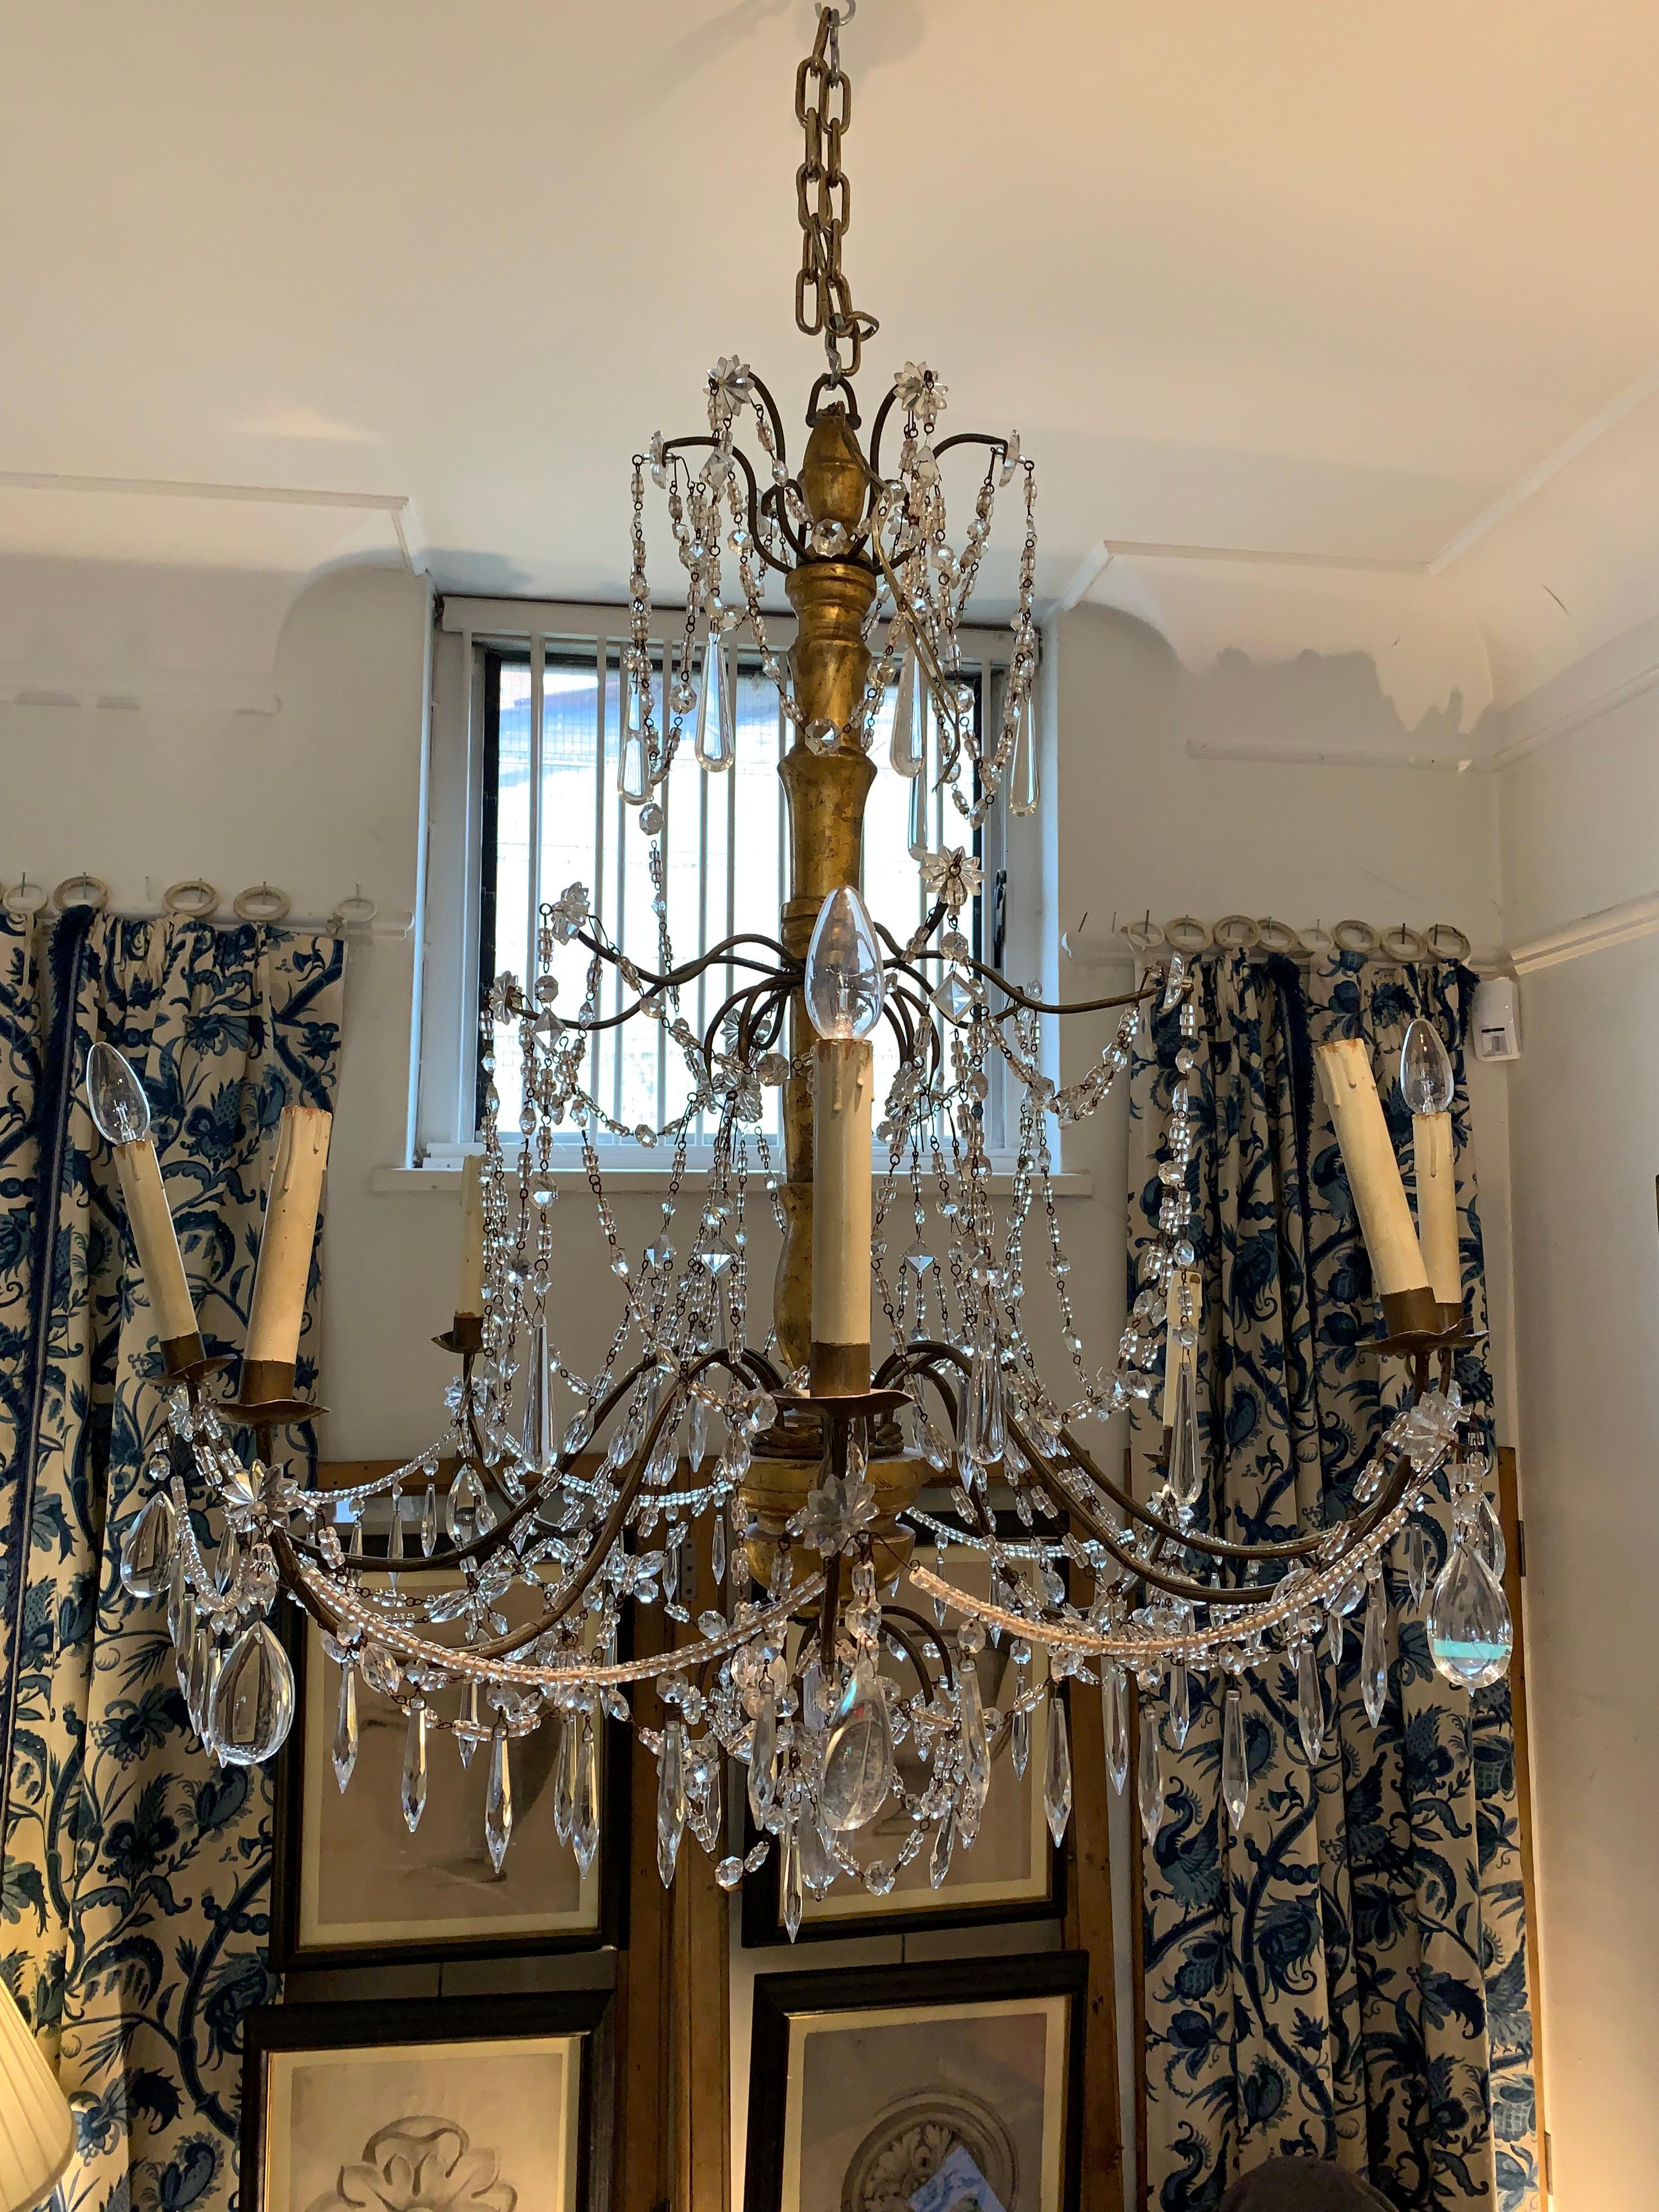 Late 19th Century Italian 8-Arm Gilt Chandelier with Glass Swags & Lustres For Sale 3